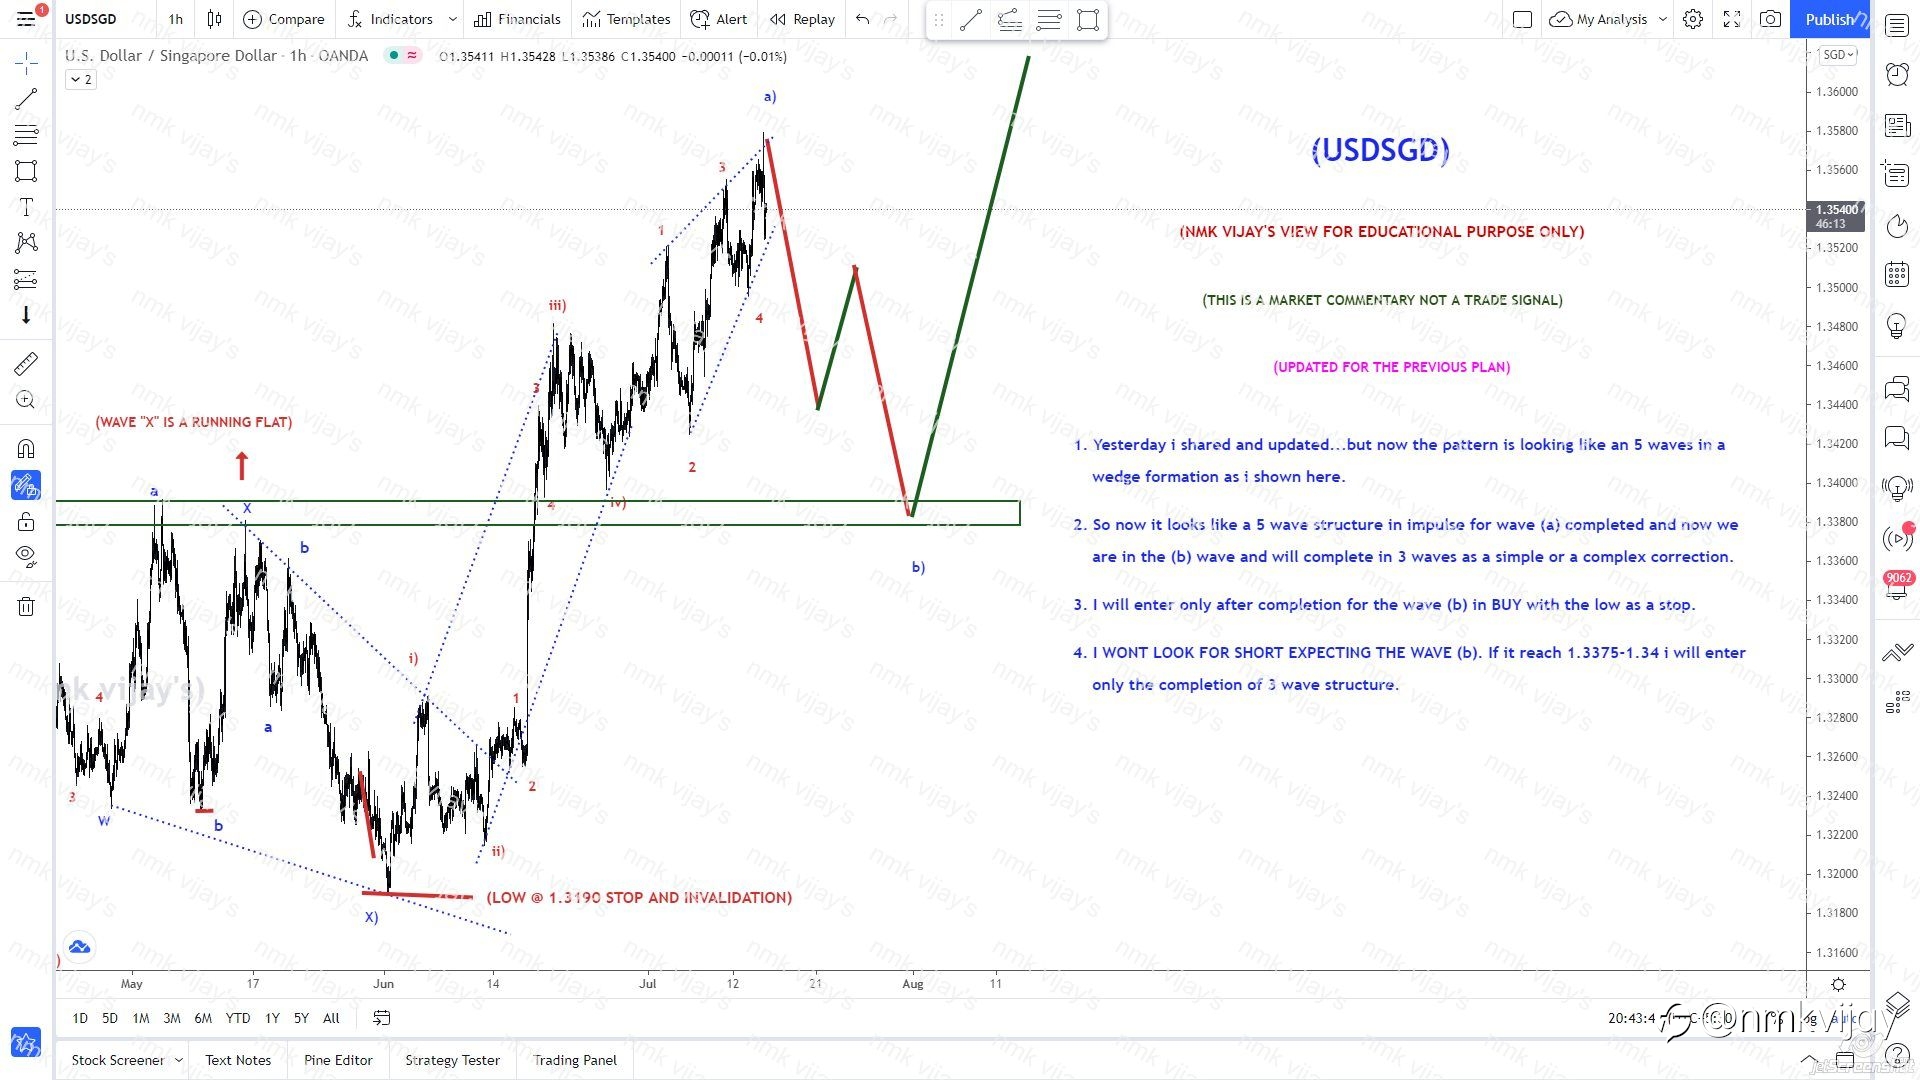 USDSGD-Wedge formation in wave 5 of V) now a,b,c to 1.34 ?